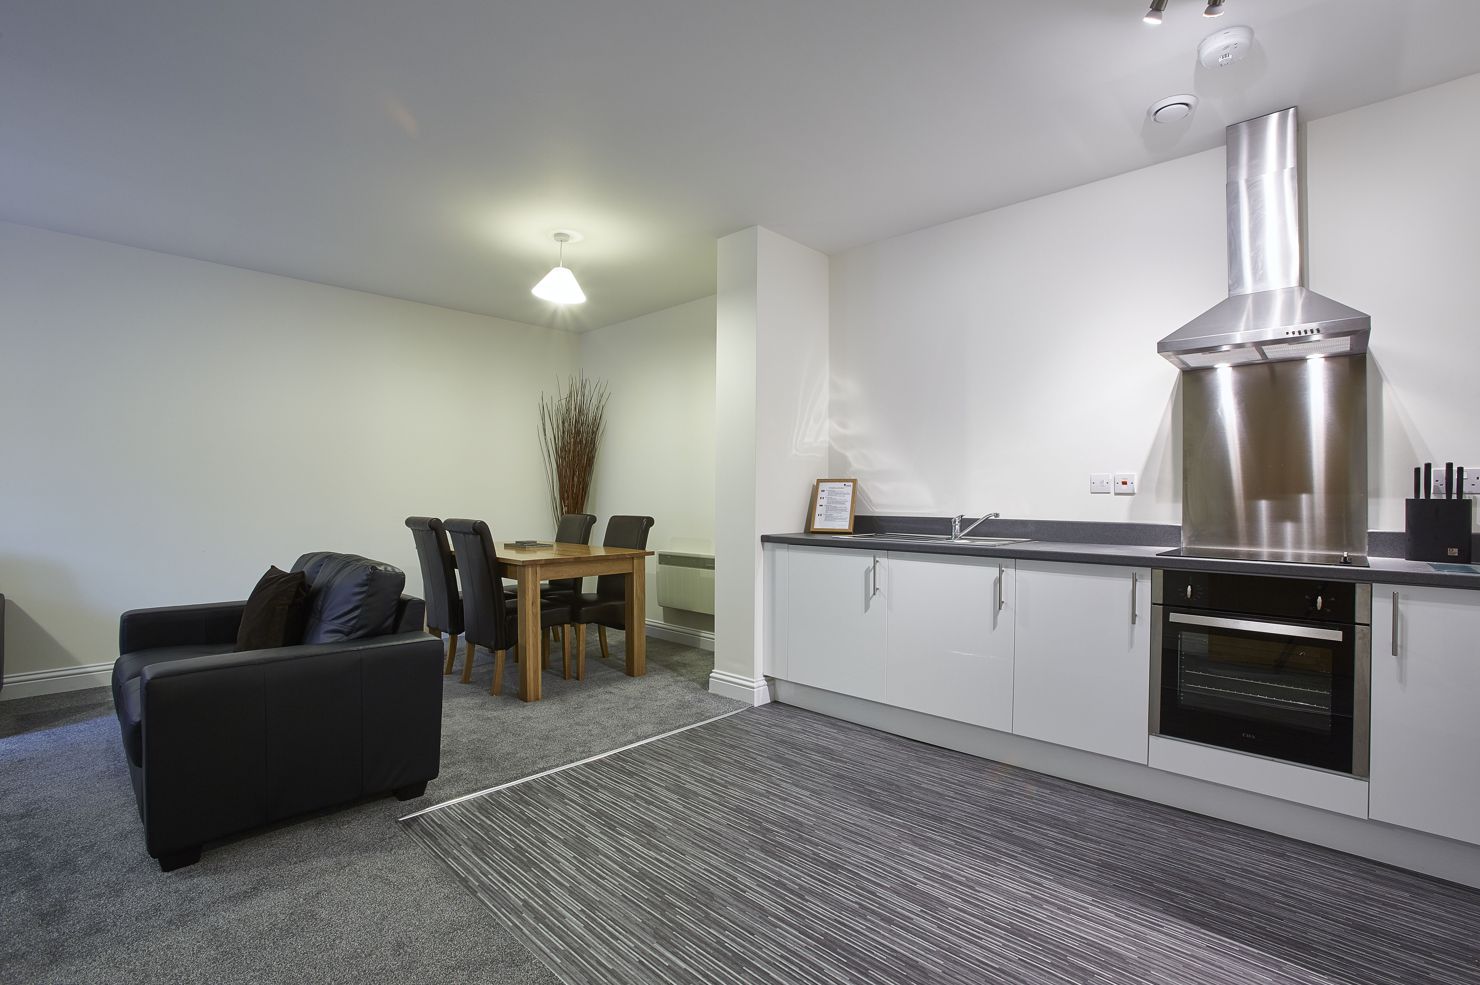 Guild-House-Self-Catering-Apartments-Swindon---Short-Stay-Accommodation-Swindon-UK-|-Urban-Stay